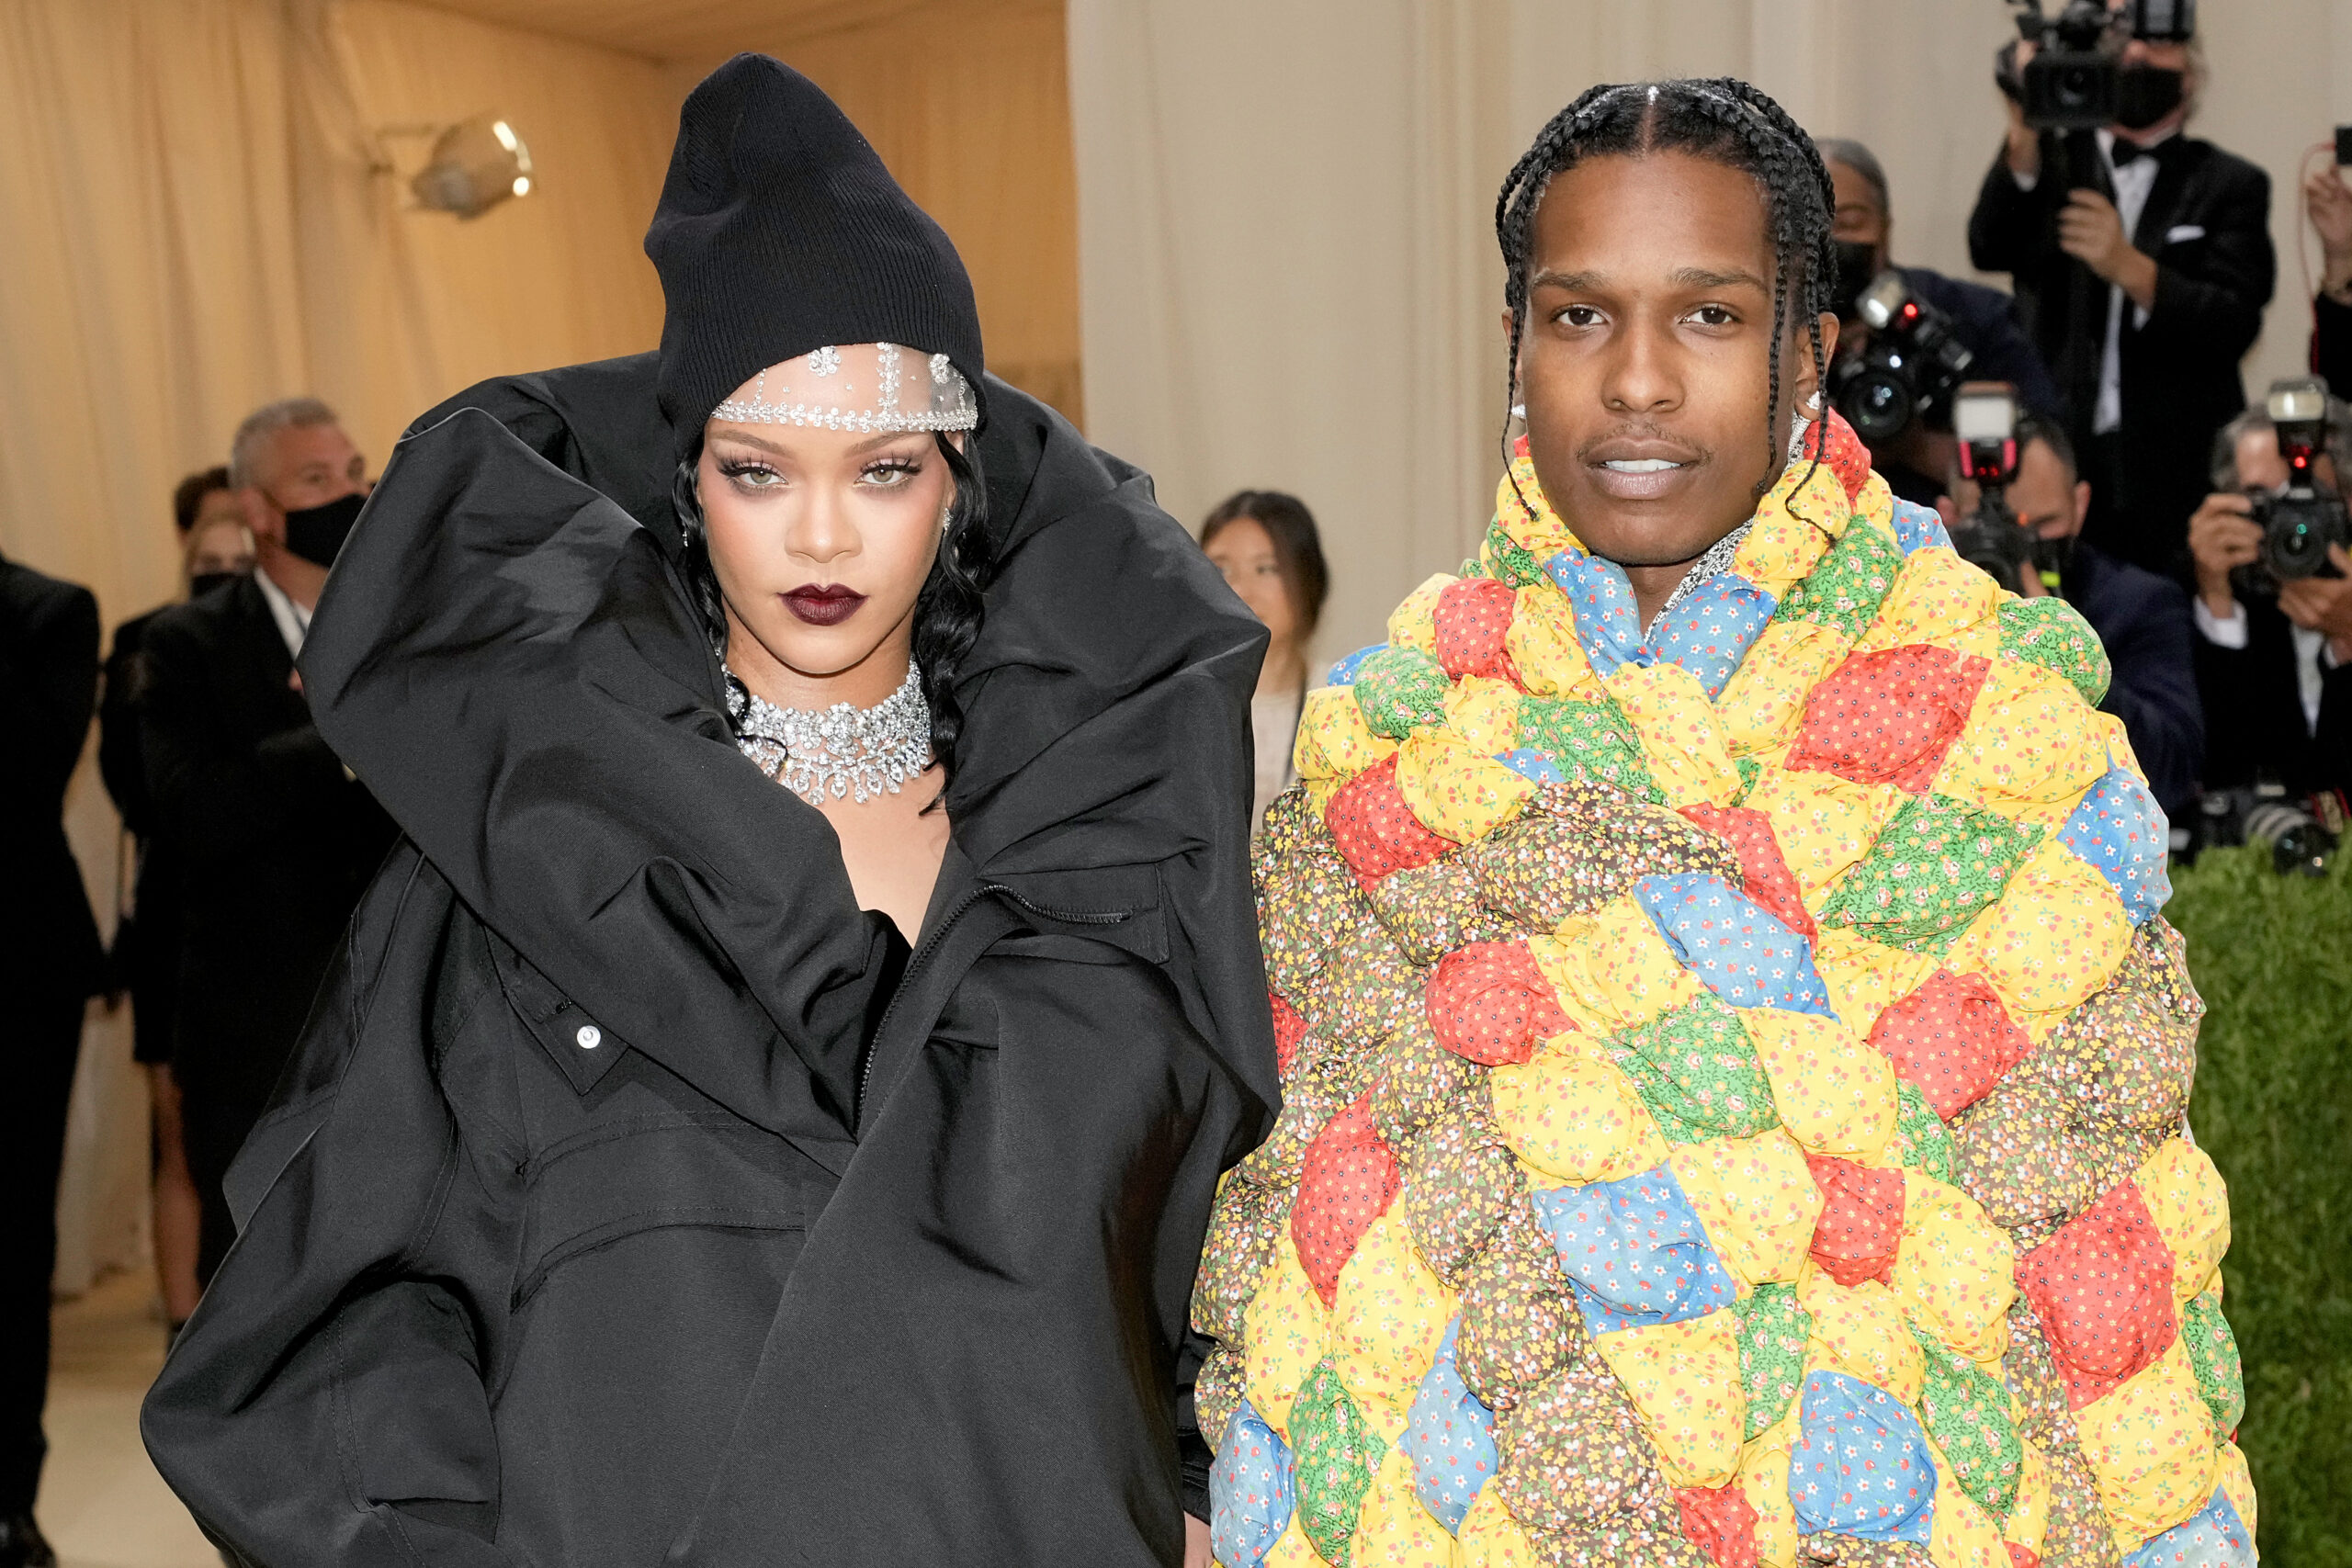 Rihanna & ASAP Rocky Coordinate In All-Blue Denim Outfits For Pharrell’s Paris Fashion Show